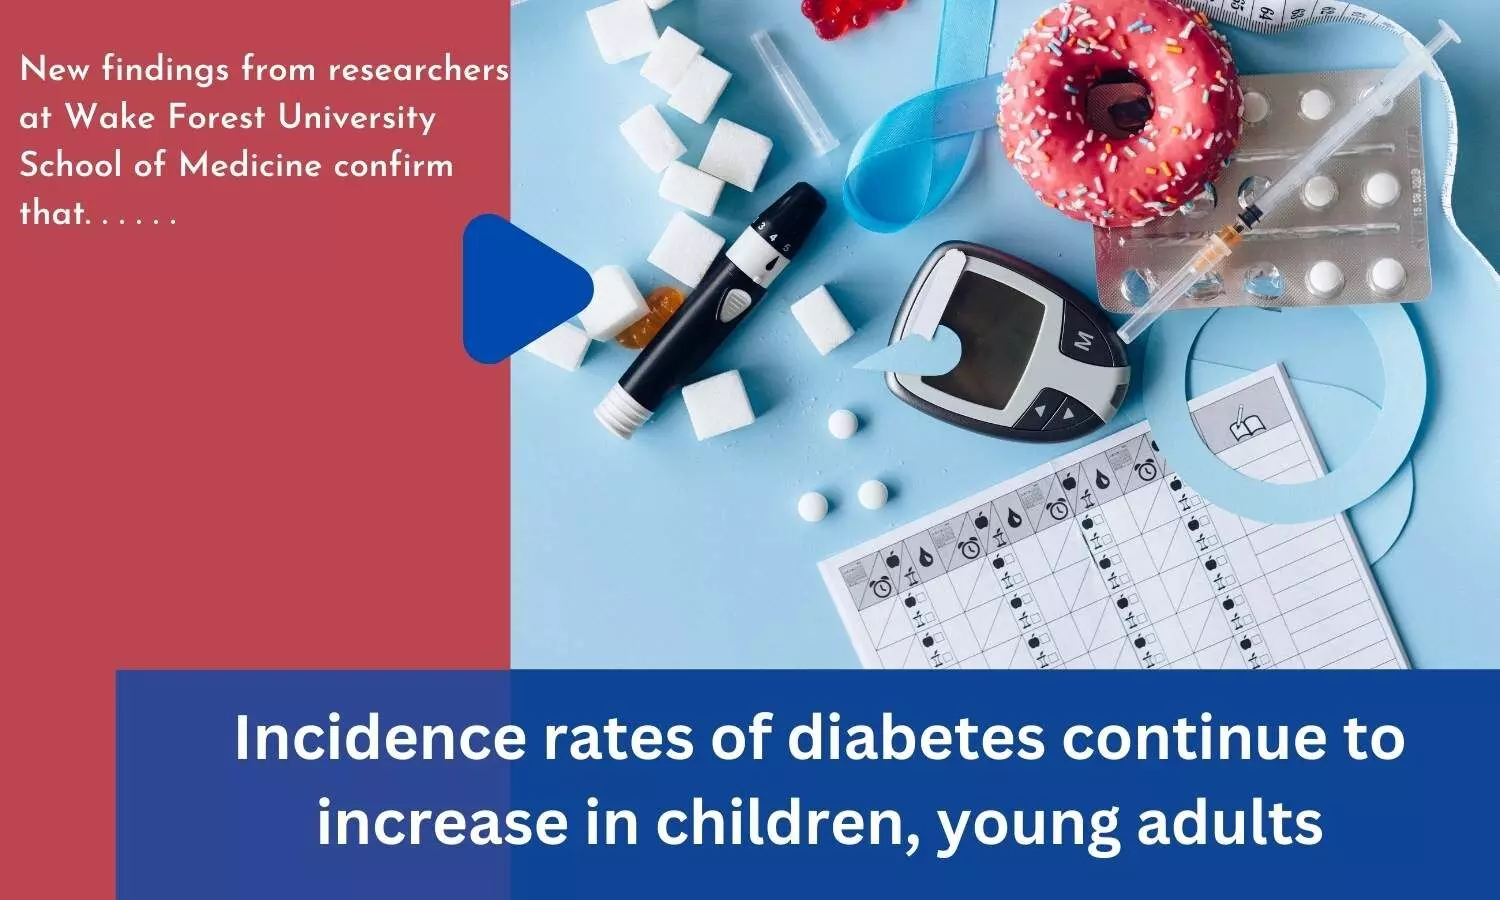 Incidence rates of diabetes continue to increase in children, young adults